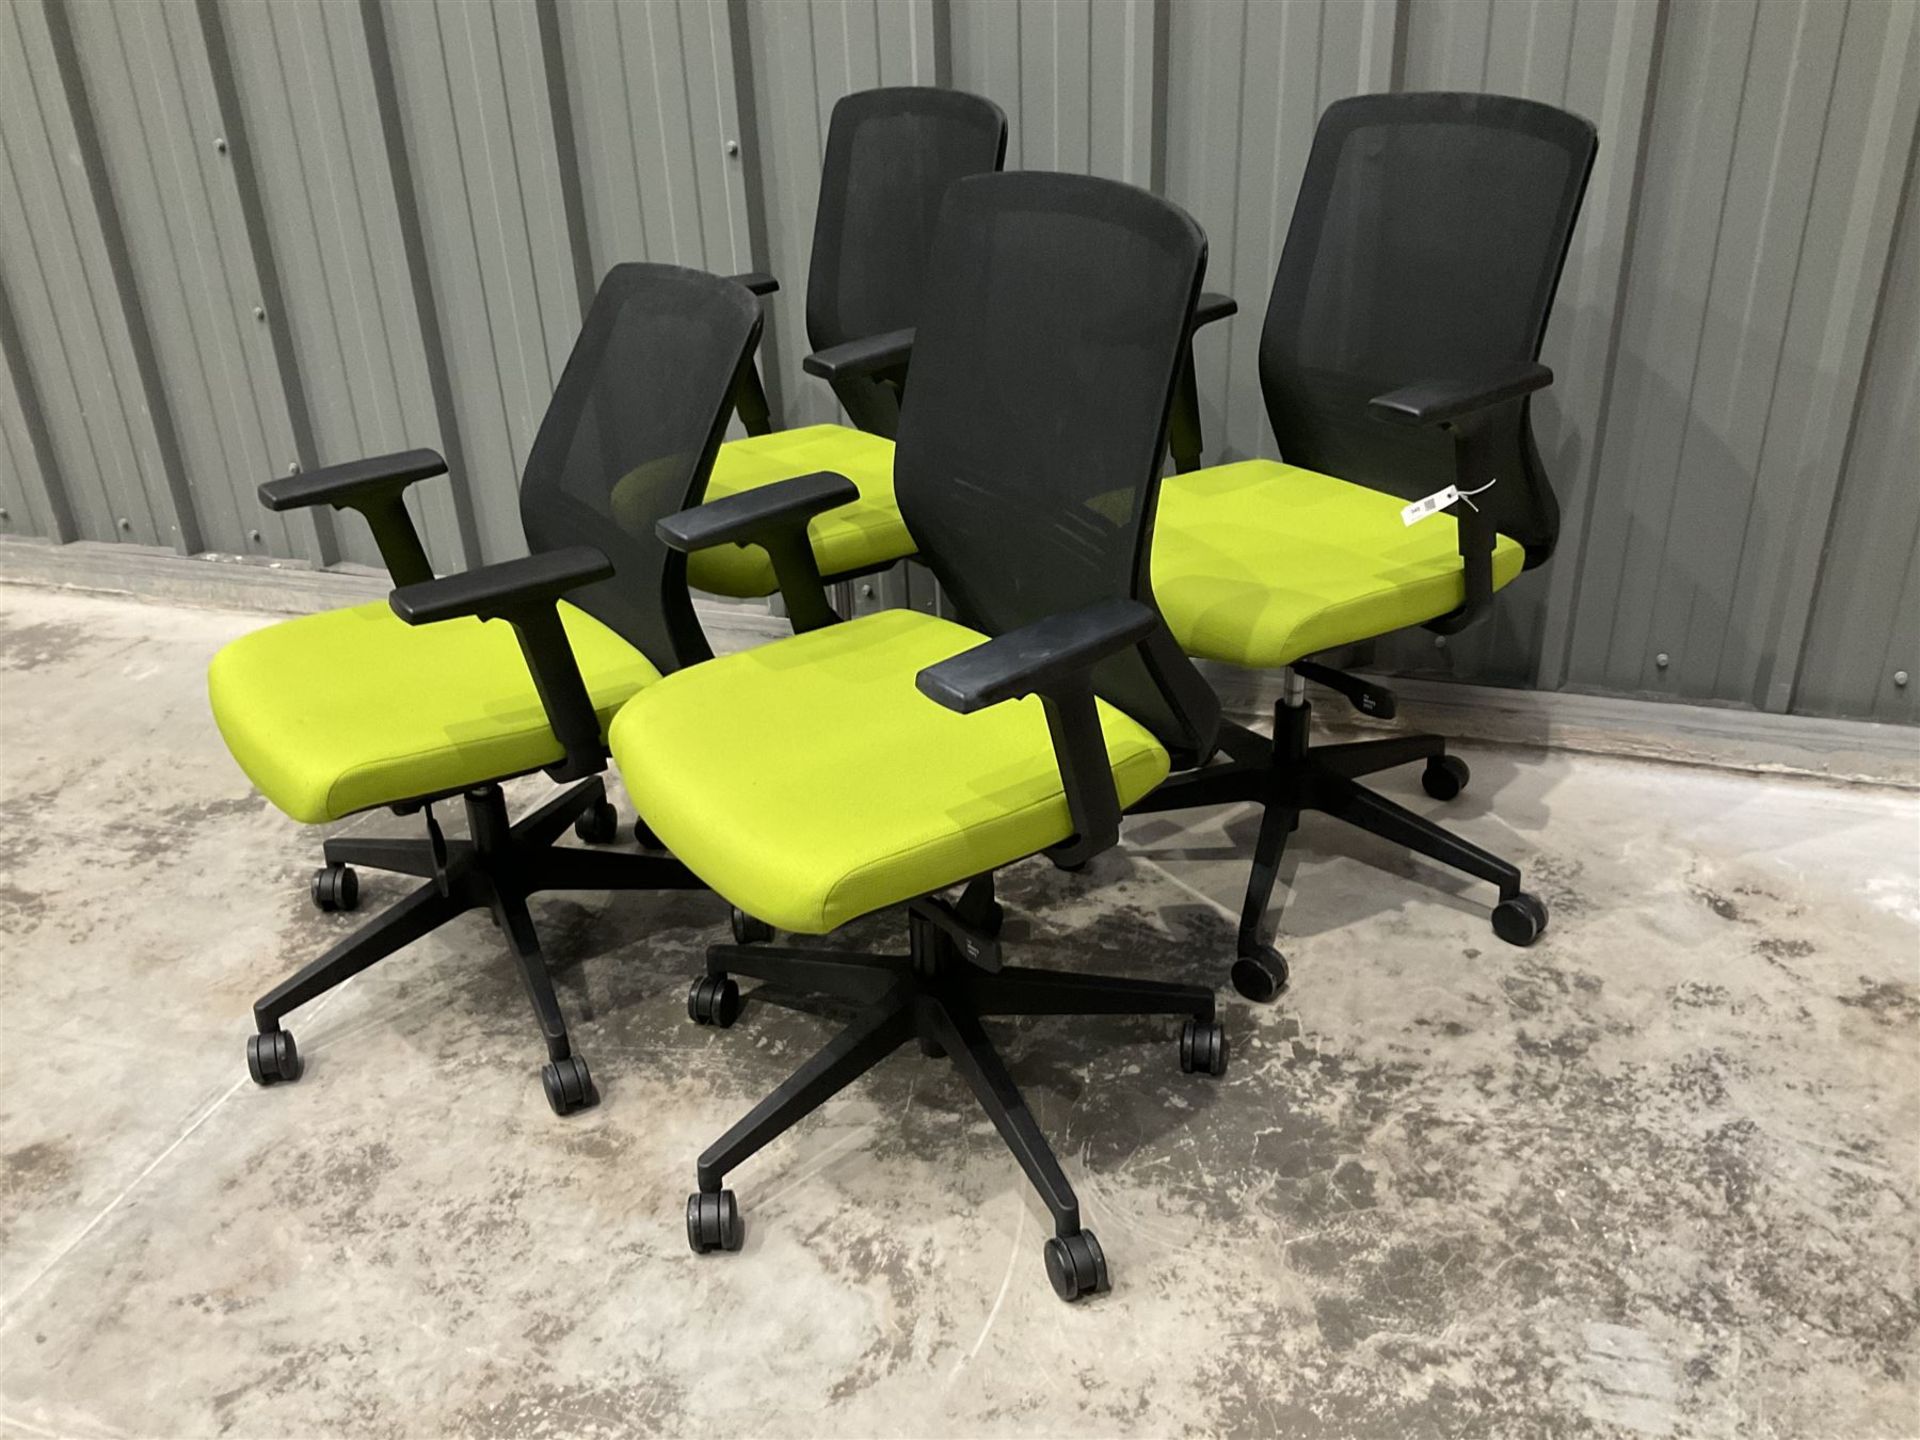 Five swivel adjustable office chairs - Image 4 of 6